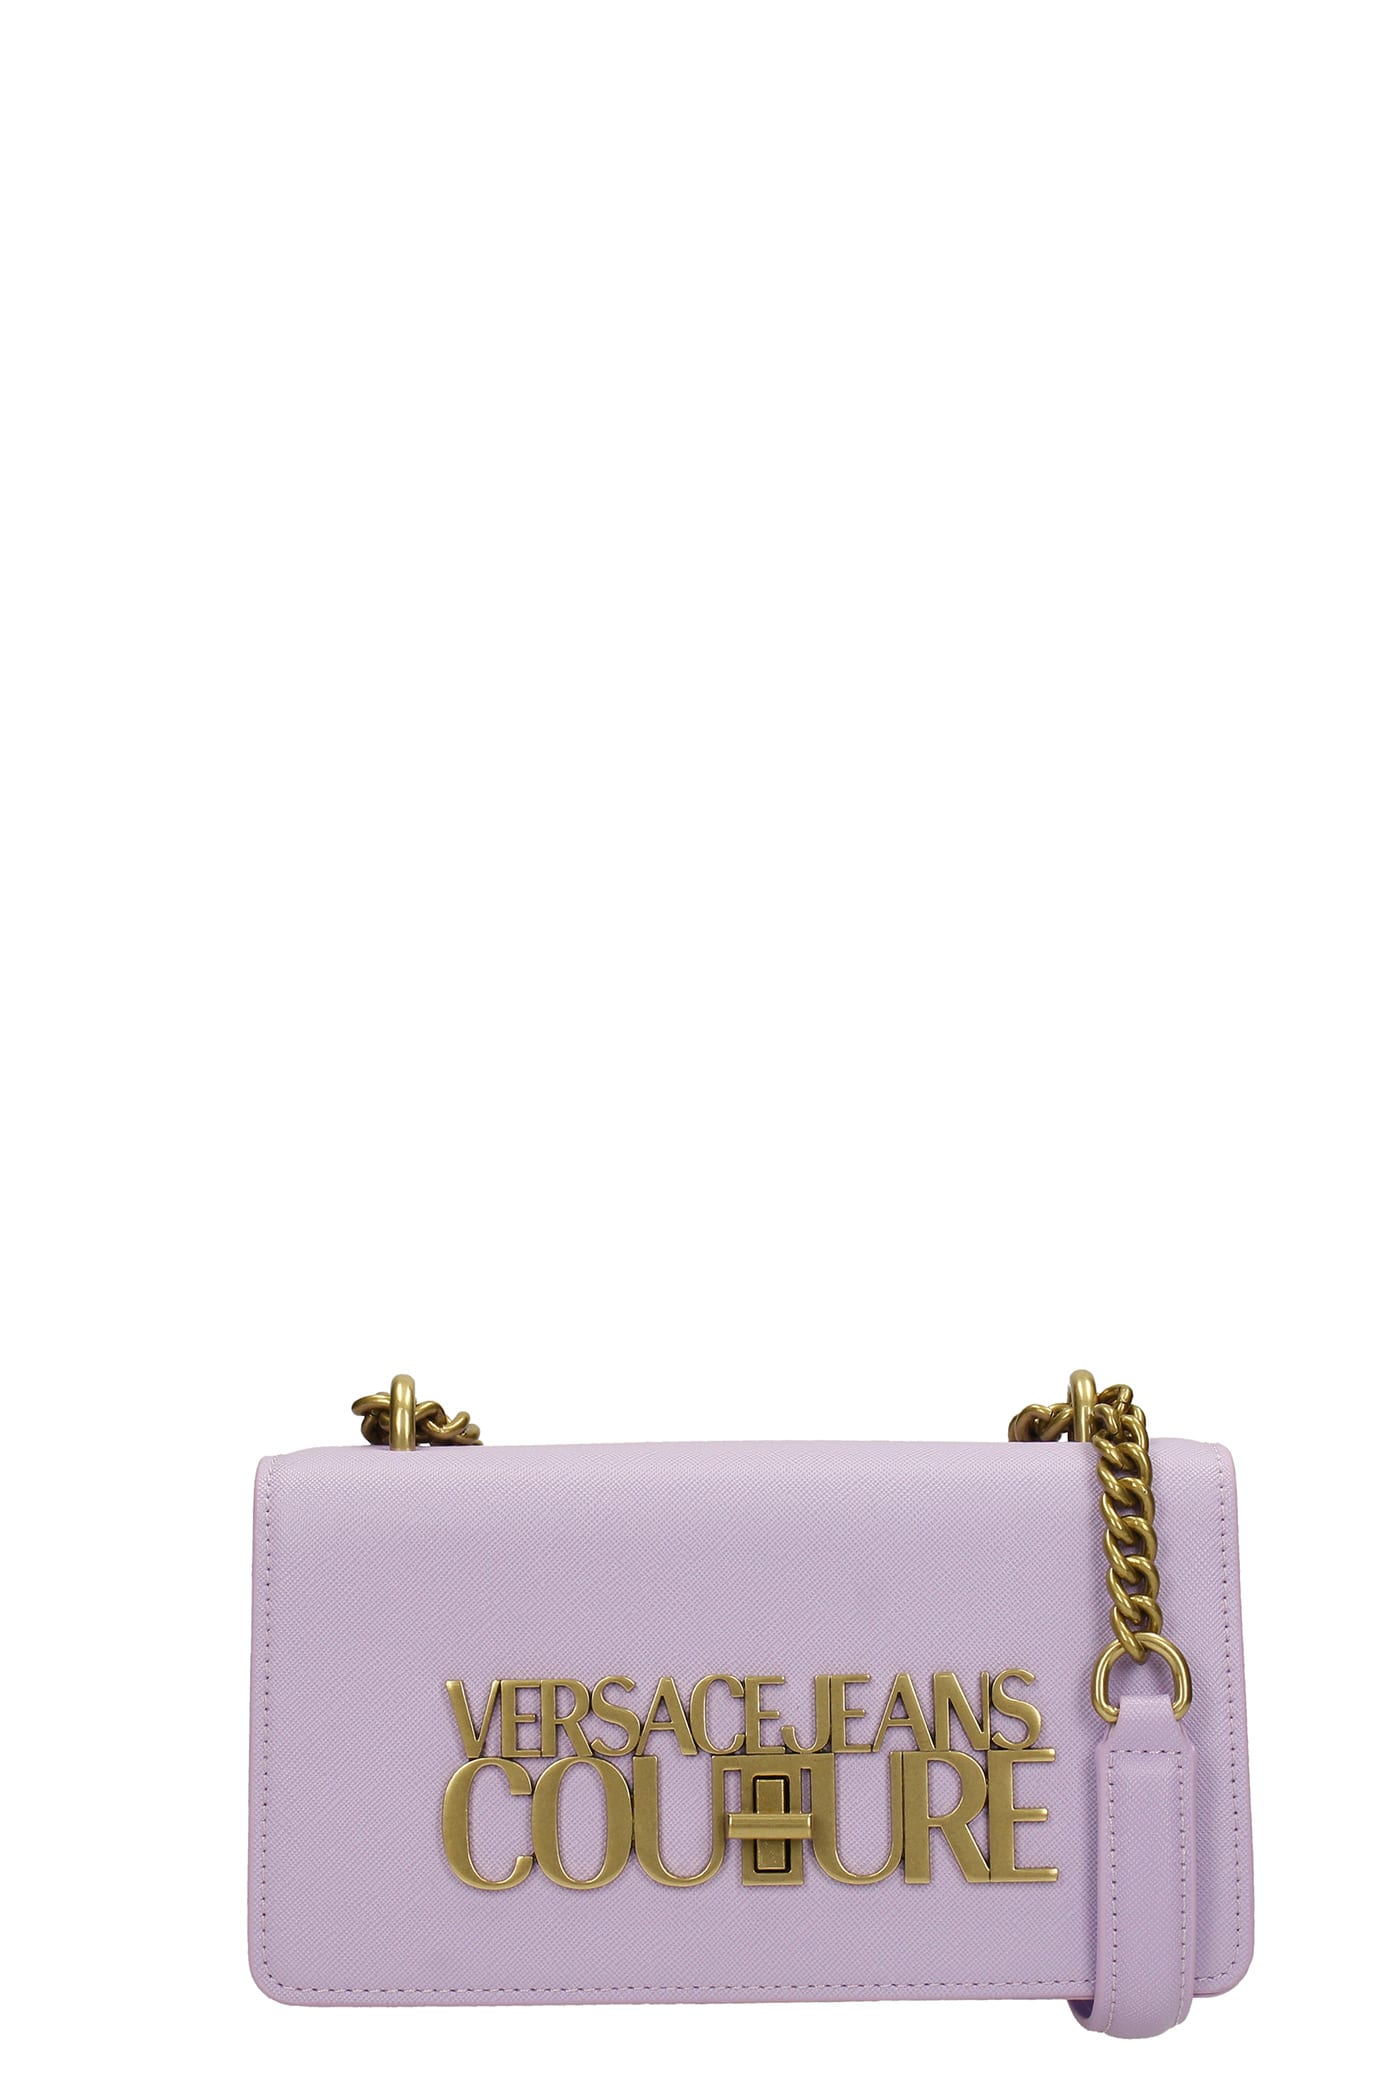 Versace Jeans Couture Shoulder Bag In Viola Faux Leather | ModeSens